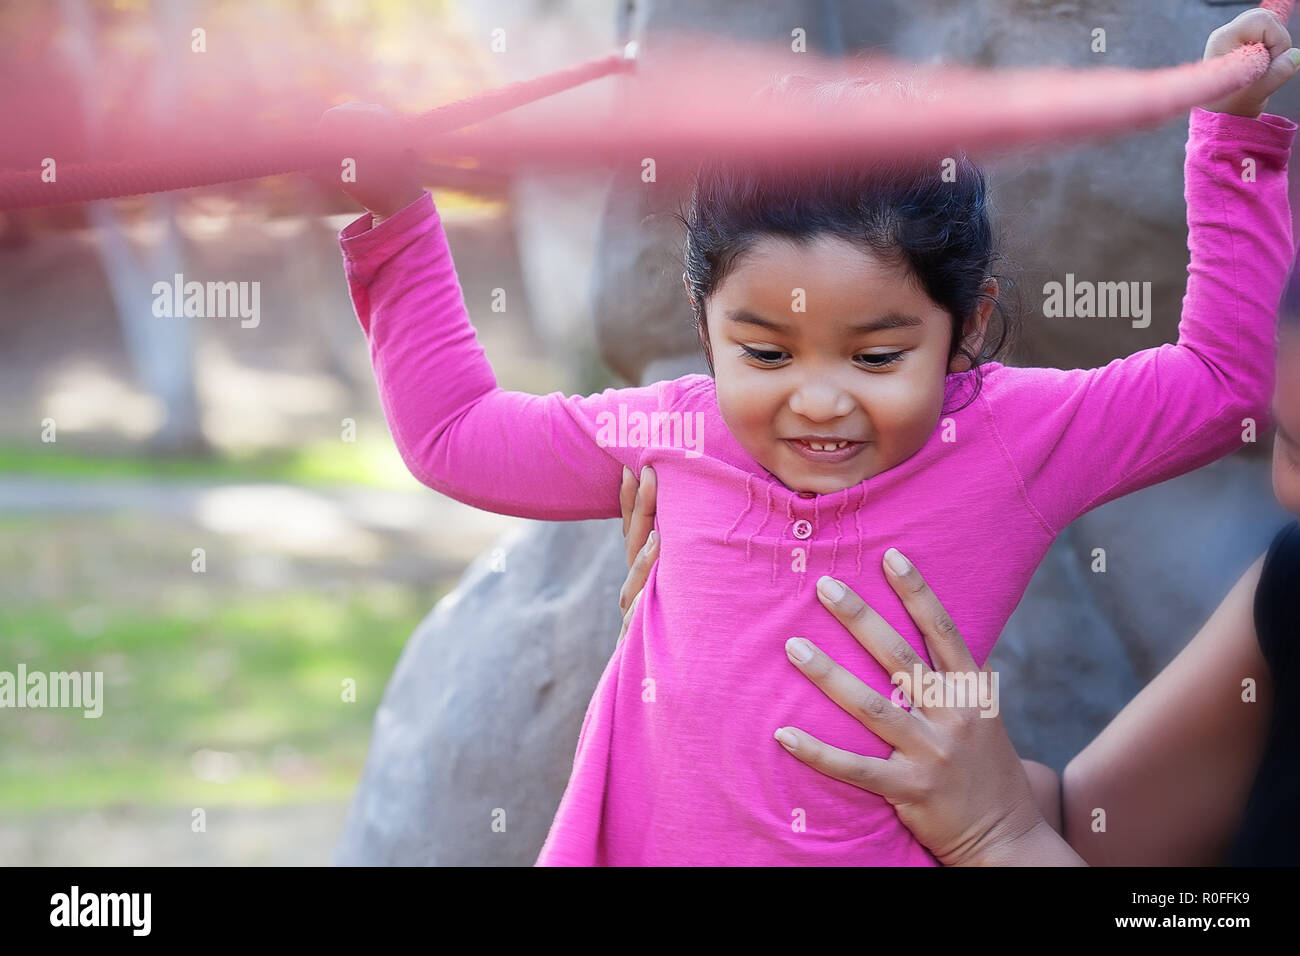 Pretty young girl of mixed race holding on to ropes, and excited as she walks on a balance beam at a kids playground while her mom helps to support he Stock Photo